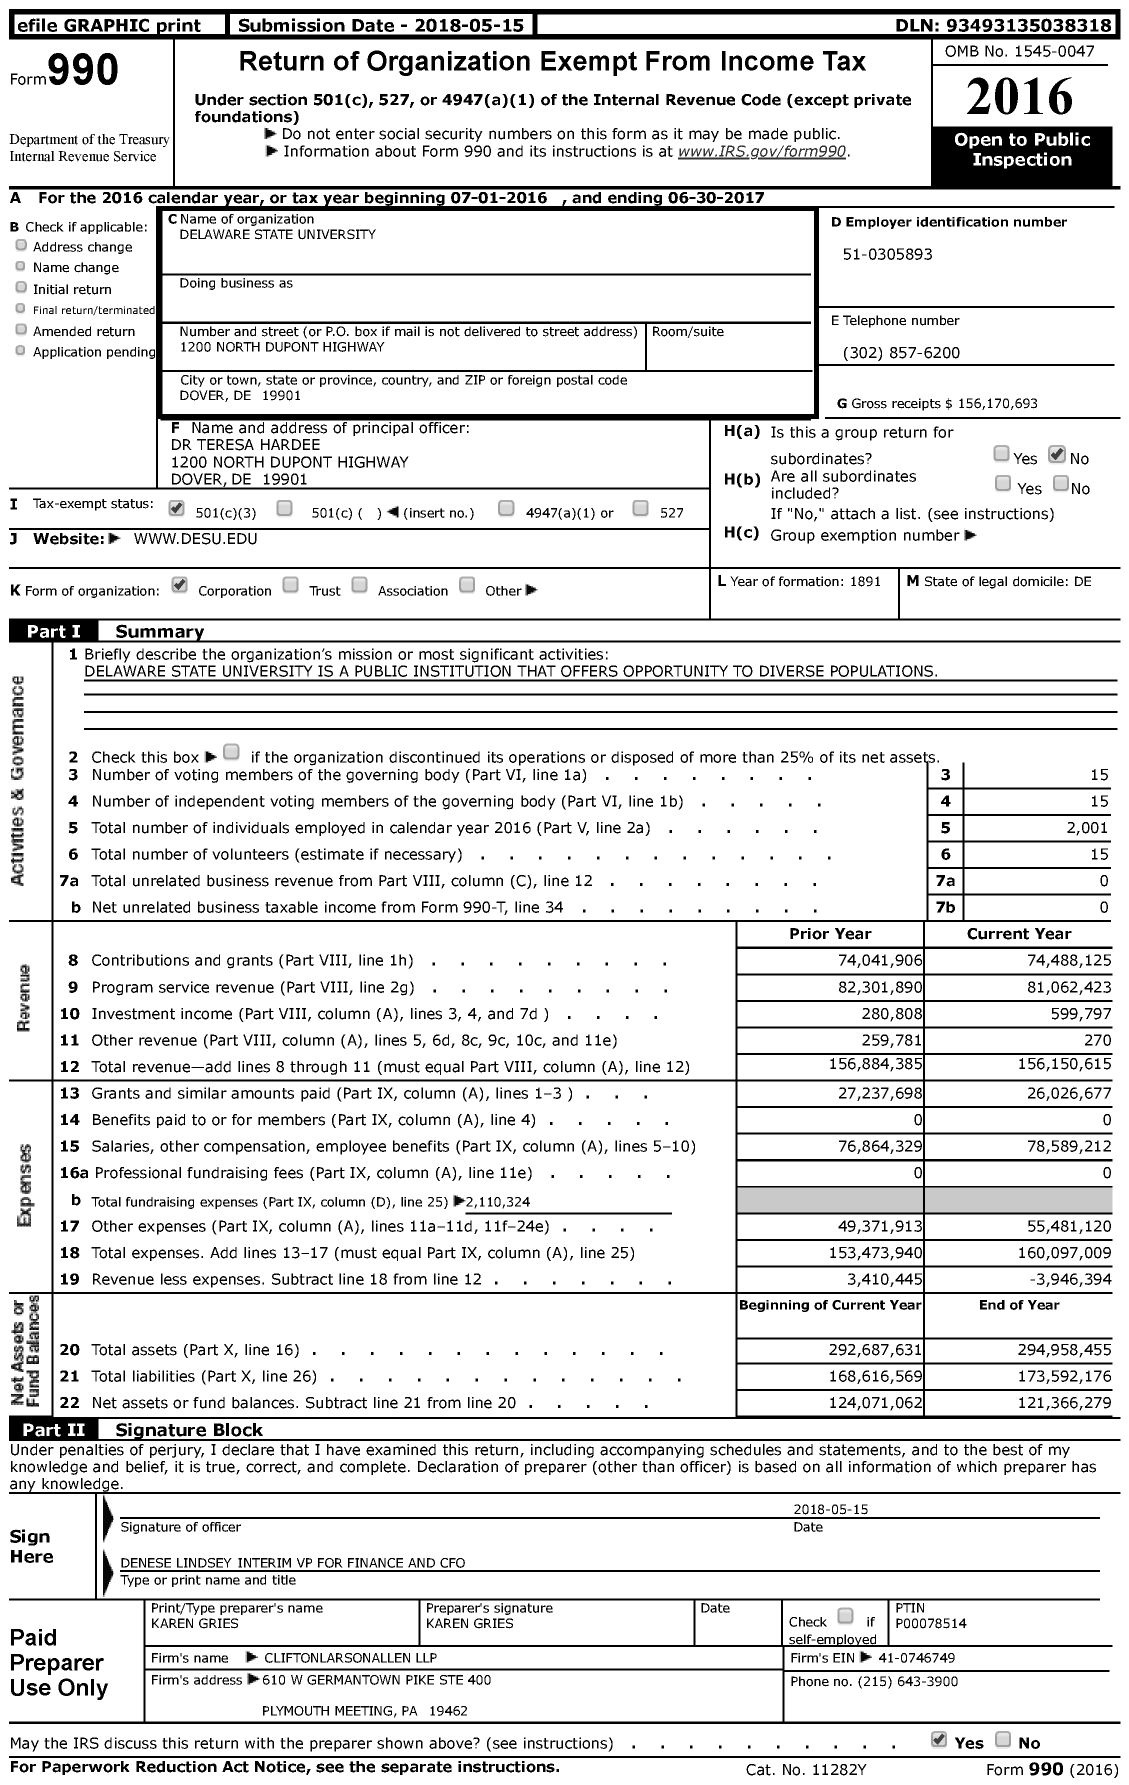 Image of first page of 2016 Form 990 for Delaware State University (DSU)